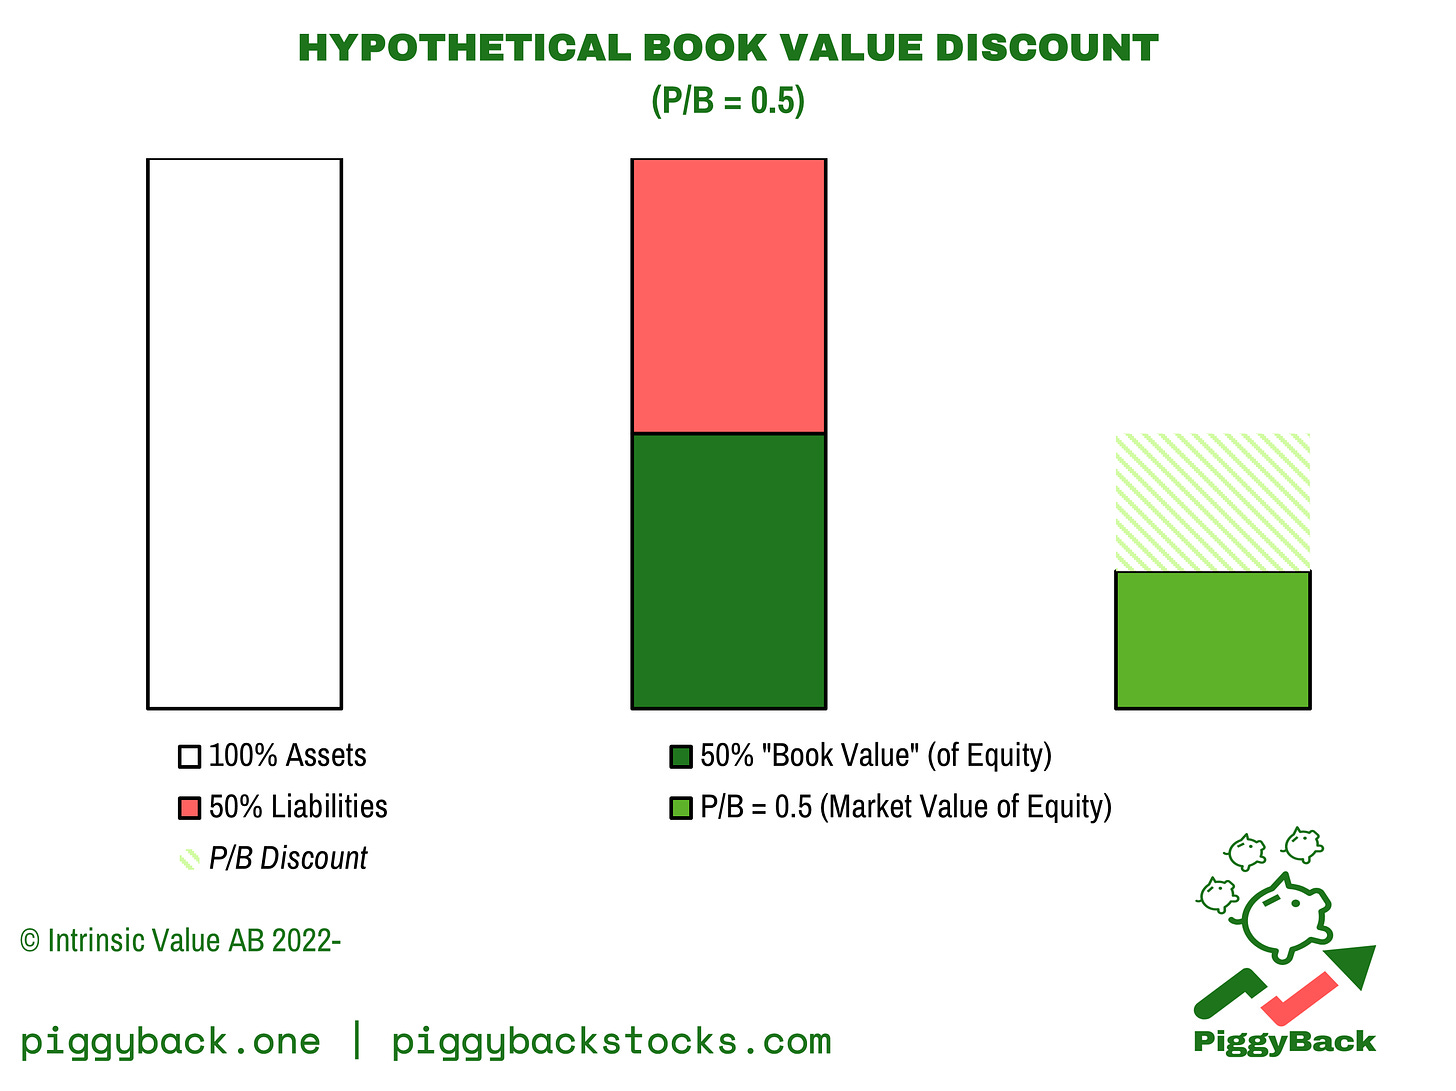 Chart 1: Hypothetical Book Value Discount of 50% (P/B = 0.5). Source: PiggyBack